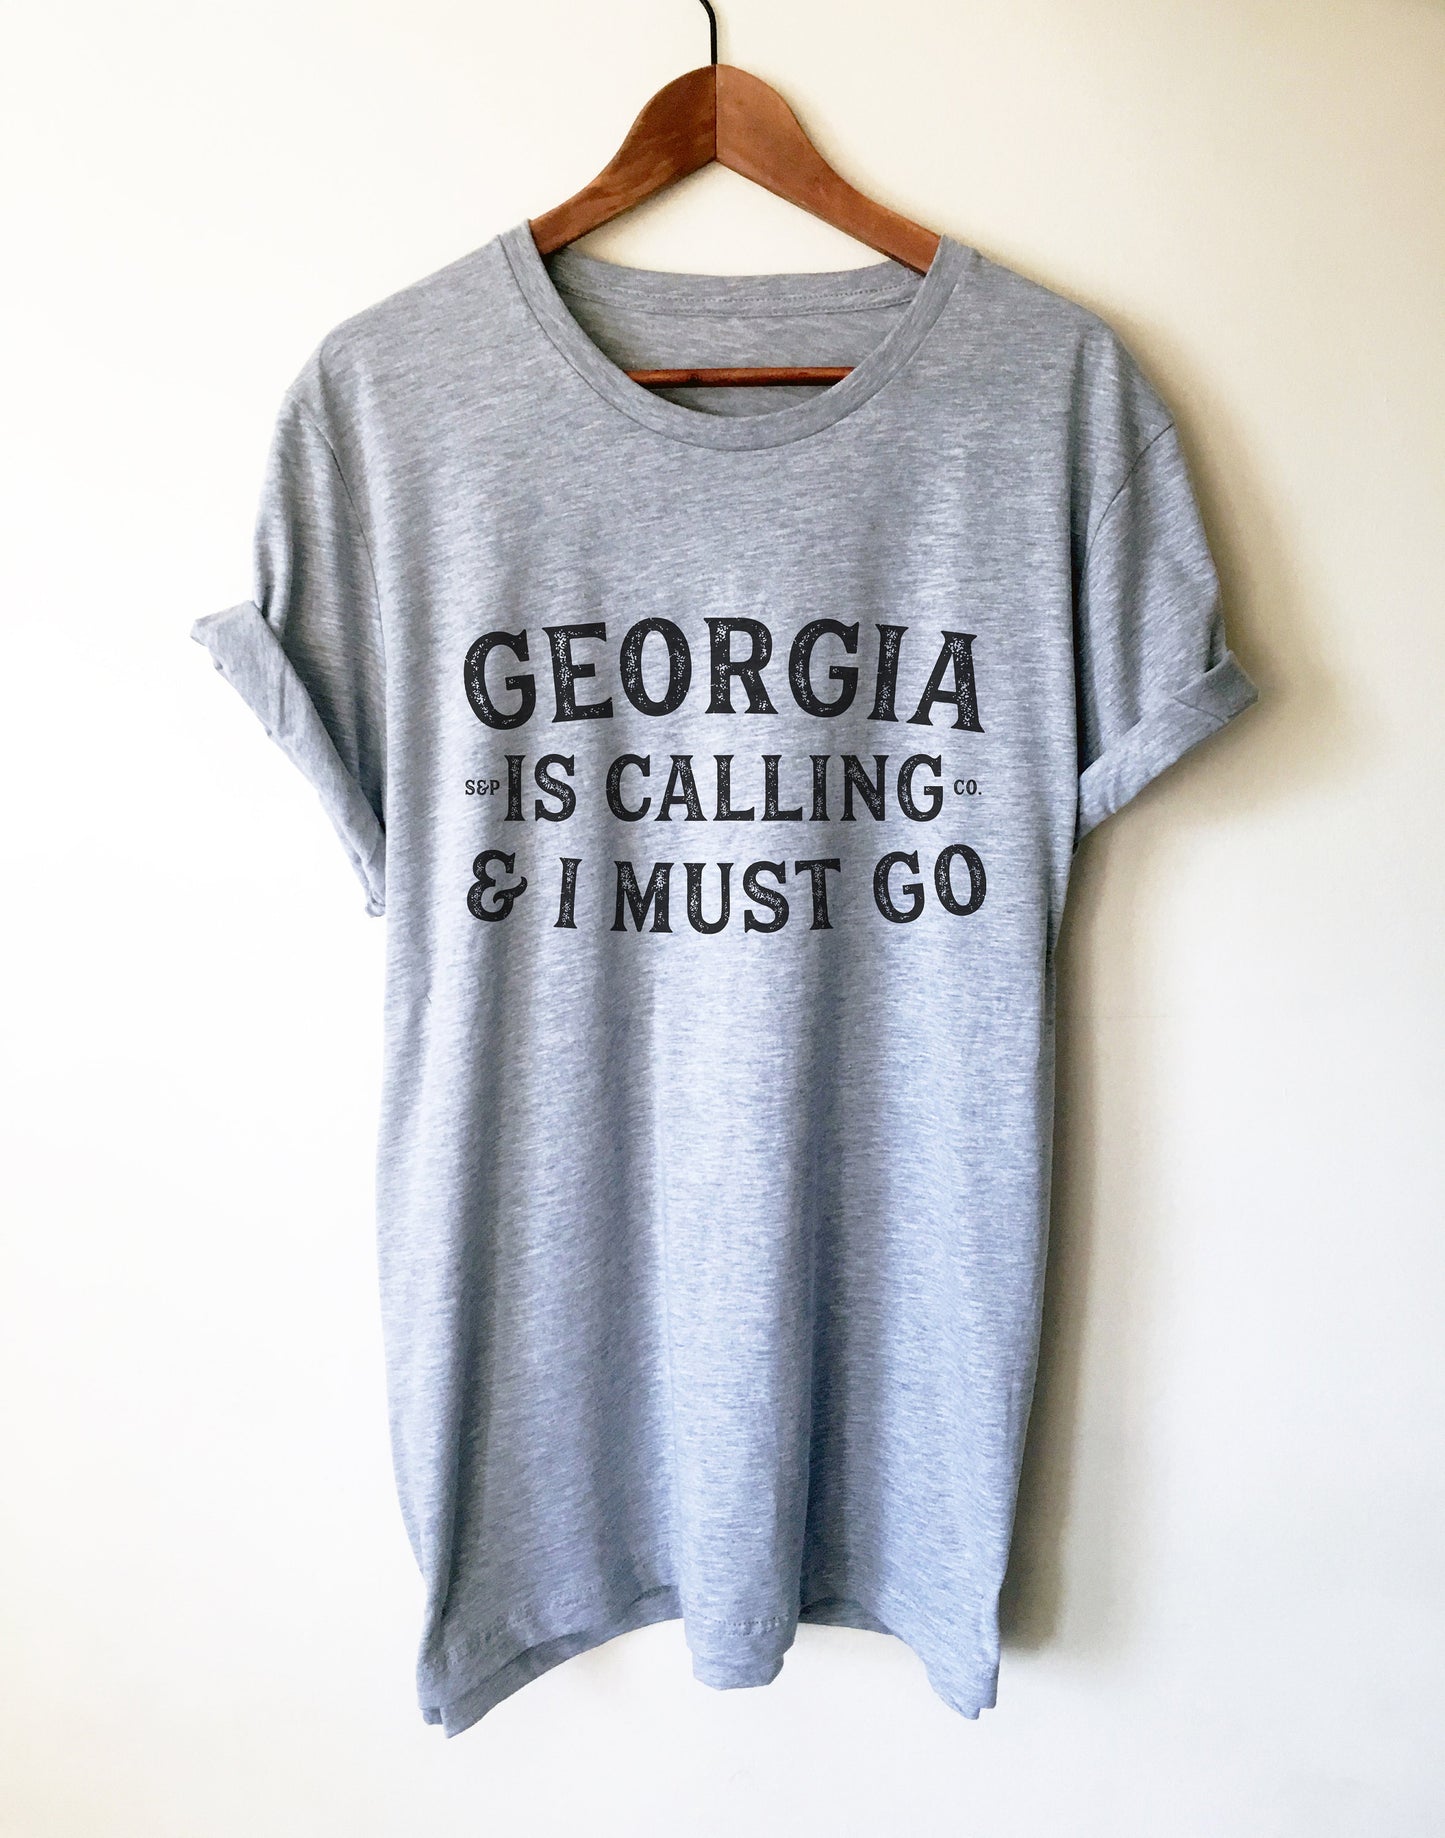 Georgia Is Calling And I Must Go Unisex Shirt - Georgia Shirt, Georgia Gift, Atlanta Shirt, Peach State Shirt, Home State Shirt